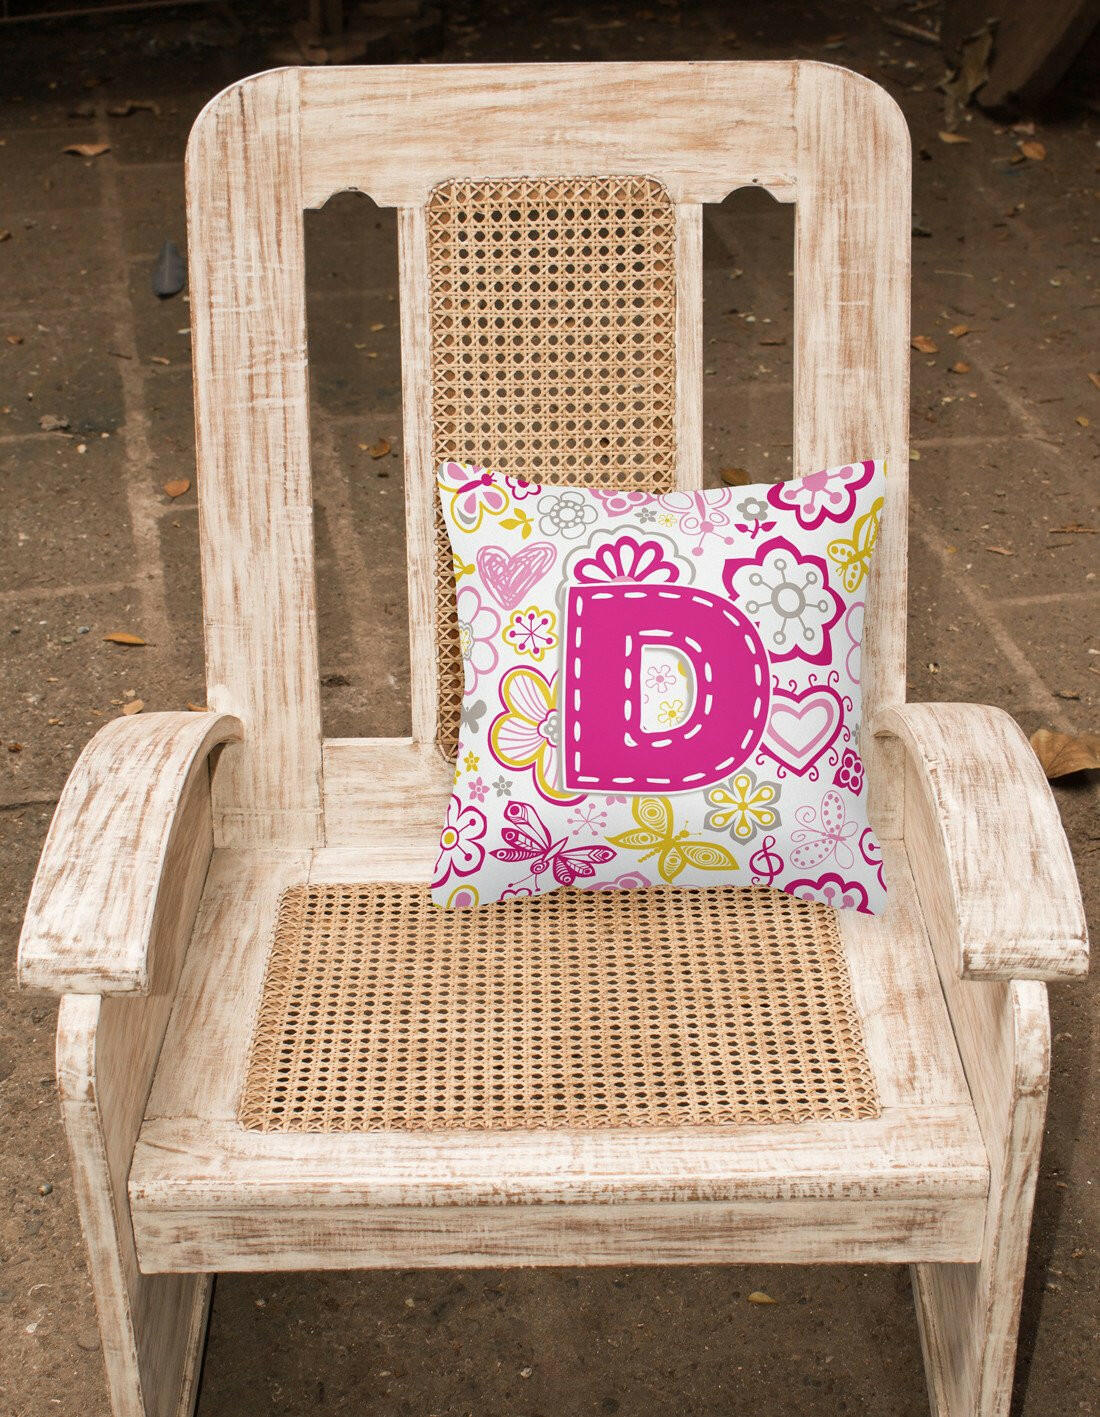 Letter D Flowers and Butterflies Pink Canvas Fabric Decorative Pillow CJ2005-DPW1414 by Caroline's Treasures